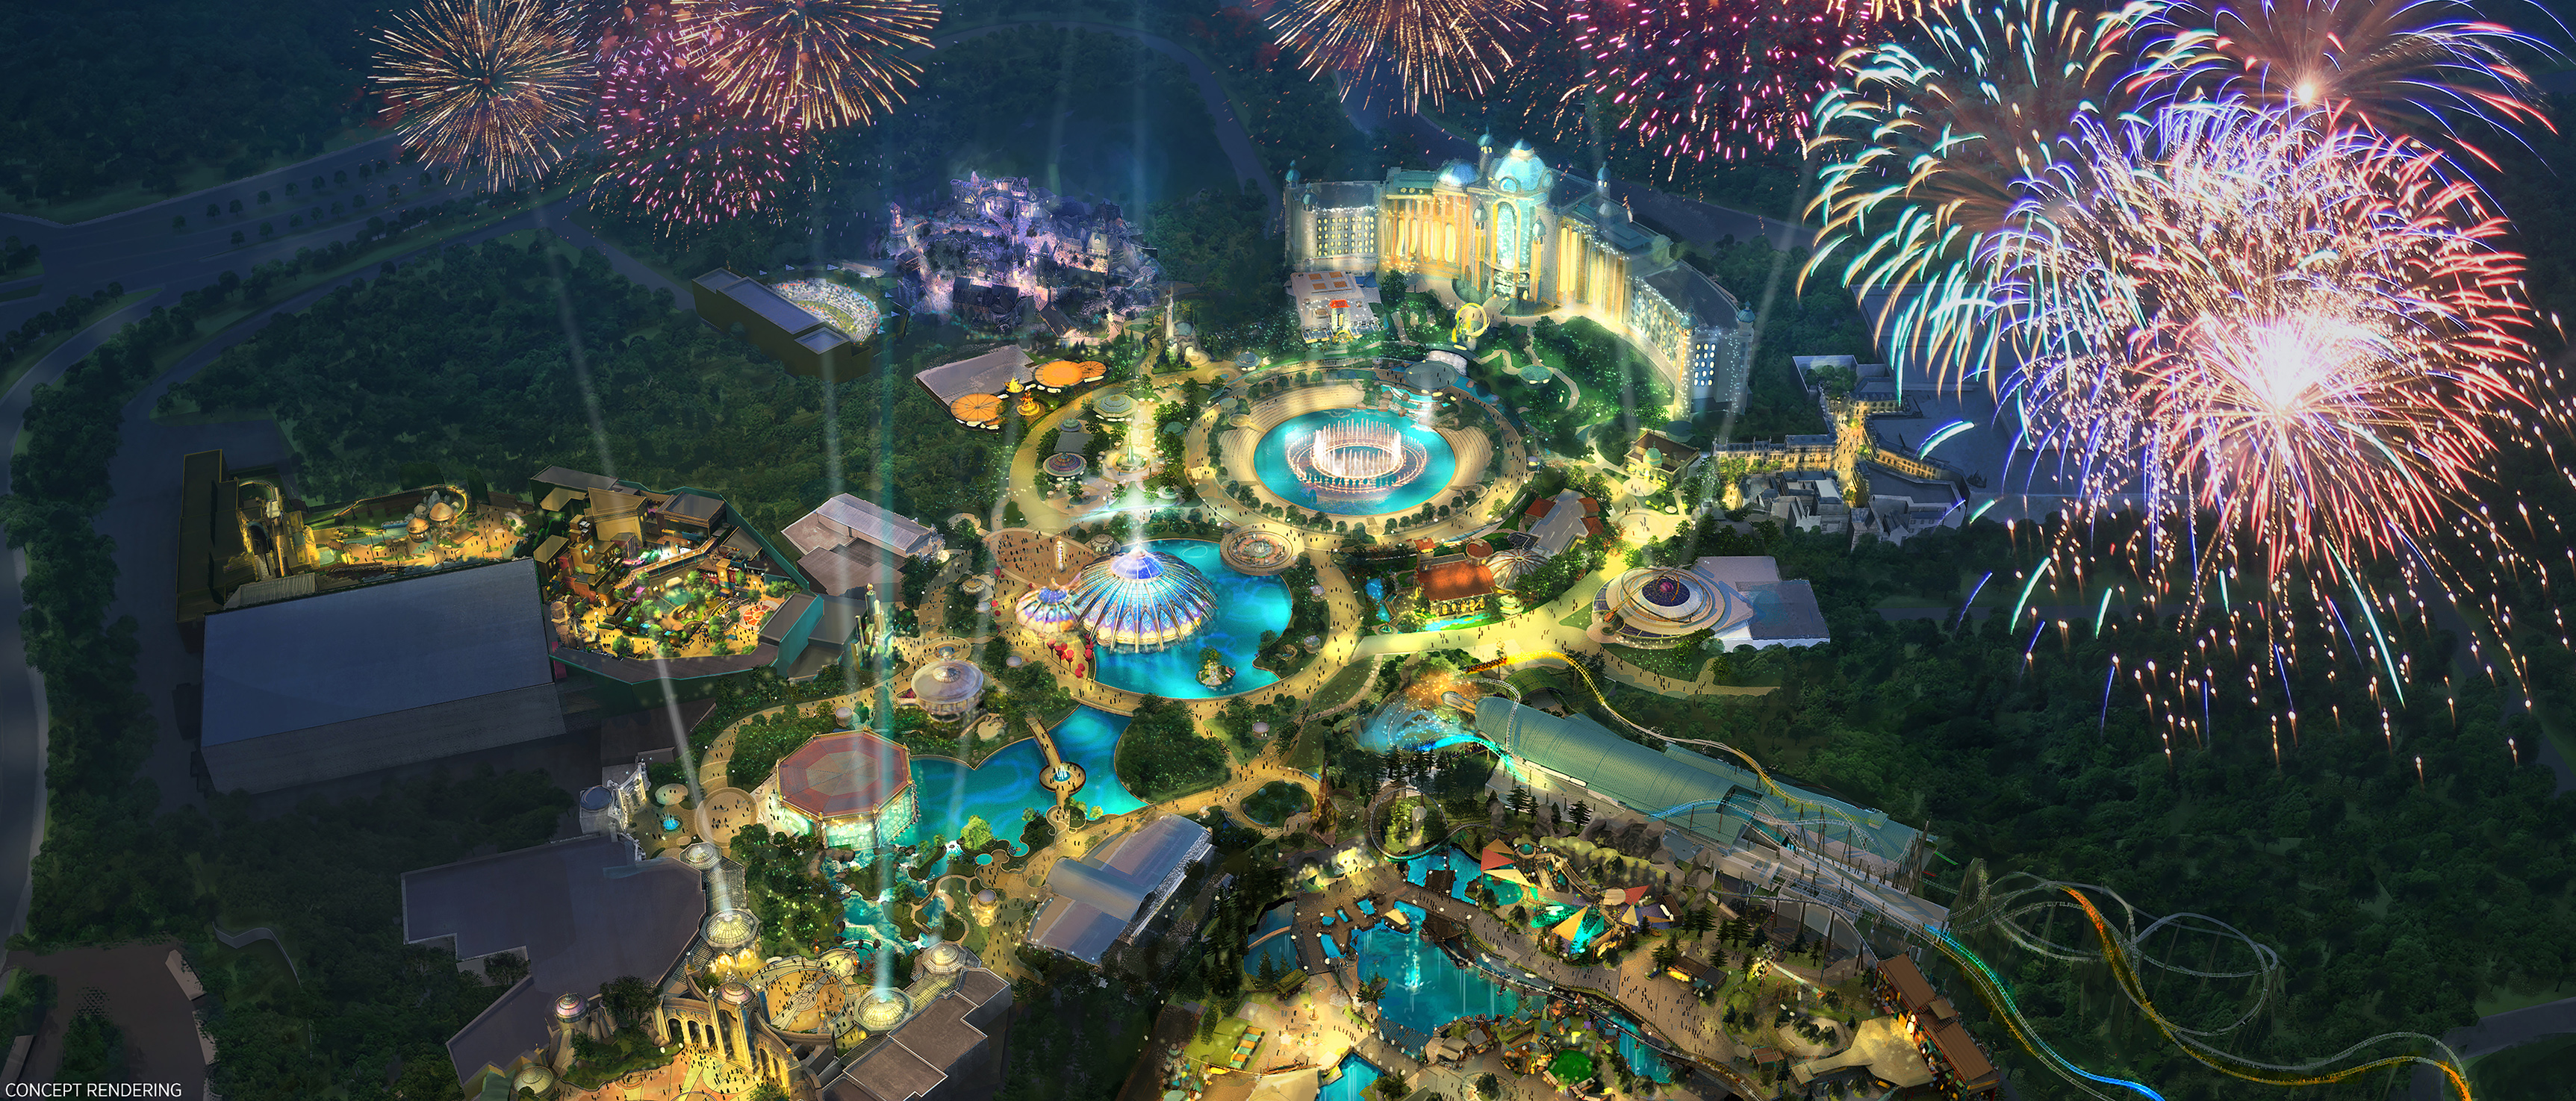 concept art for universal orlando resort’s epic universe theme park, featuring five lands, a hotel, a strip of shops and a new roller coaster